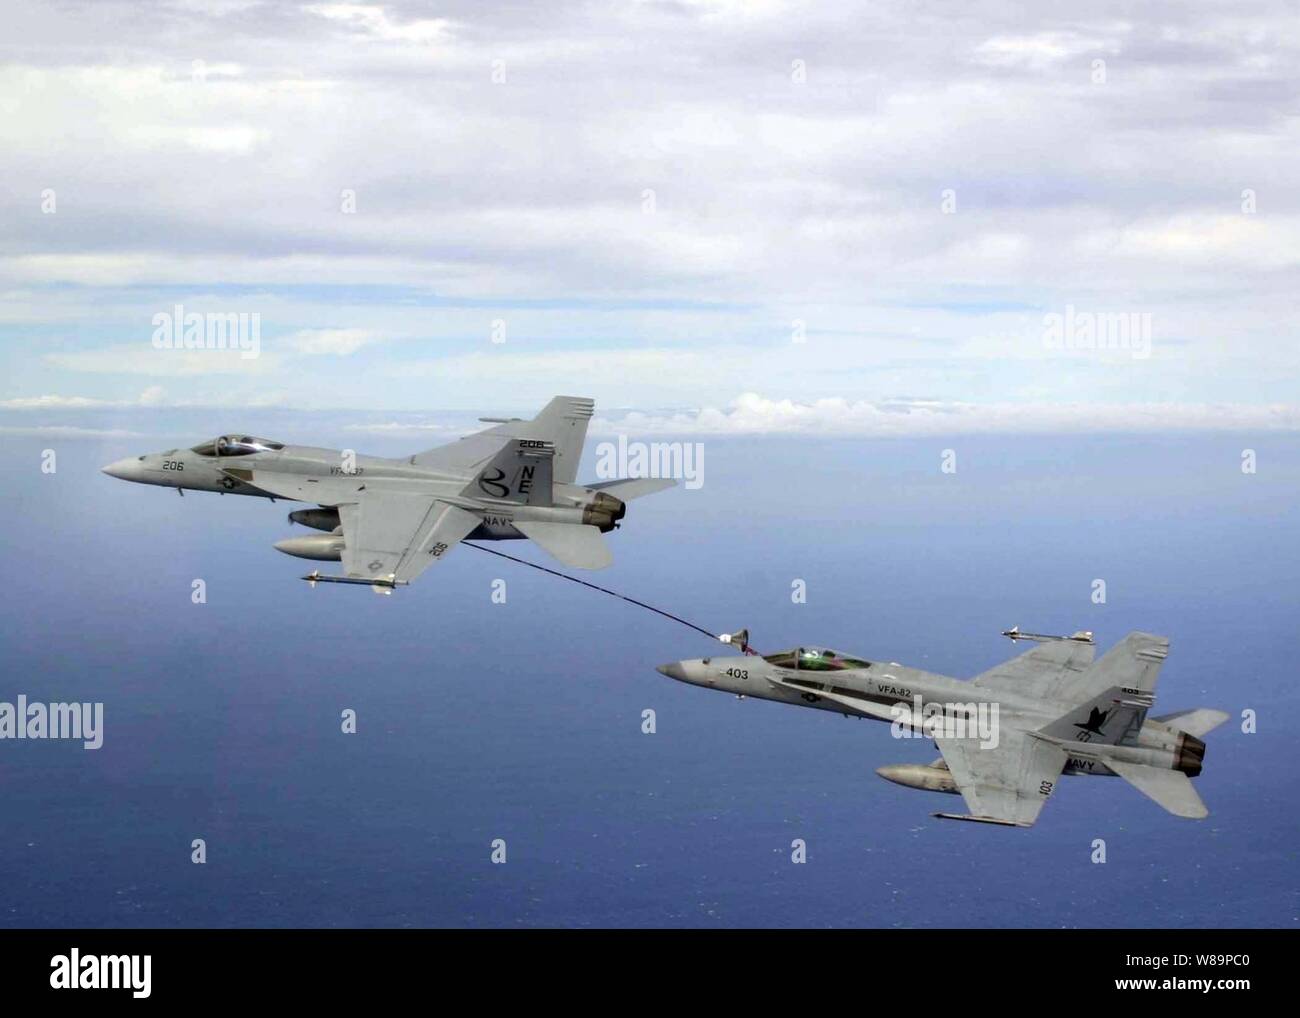 An F/A-18E Super Hornet (left) refuels an F/A-18C Hornet in-flight over the western Pacific Ocean on Oct. 28, 2004.  The Super Hornet is assigned to Strike Fighter Squadron 137 and the Hornet is assigned to Strike Fighter Squadron 82.  Both squadrons are assigned to Carrier Air Wing 2 aboard the aircraft carrier USS Abraham Lincoln (CVN 72) deployed in the western Pacific Ocean. Stock Photo